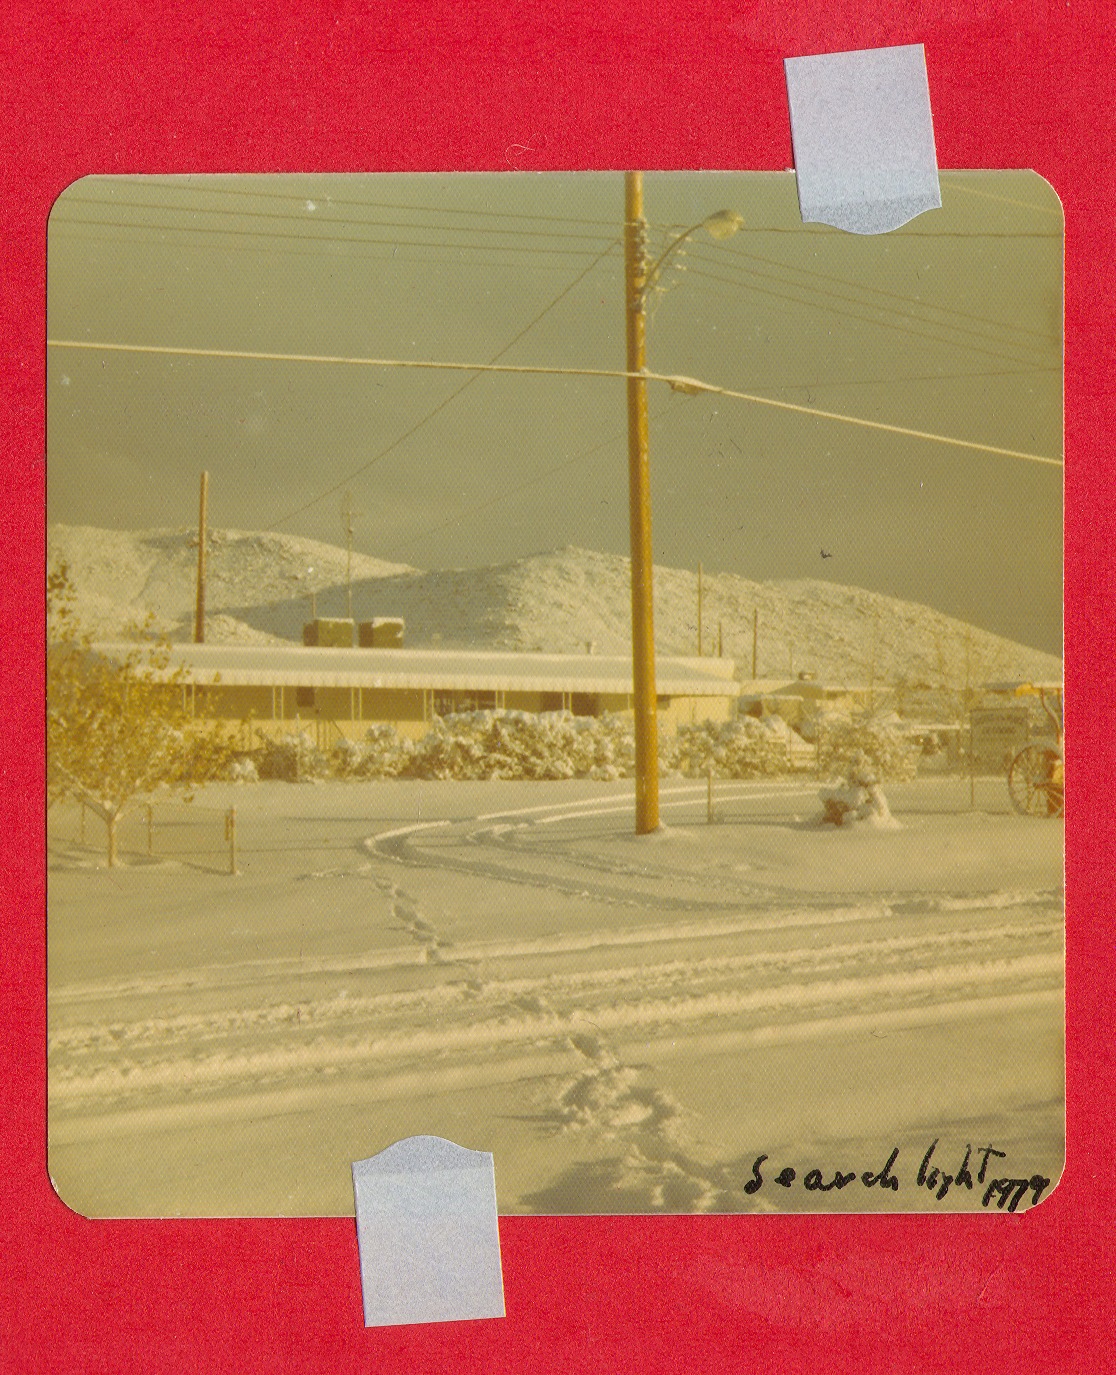 A snow-covered house in Searchlight, (Nev.), 1979: photographic print